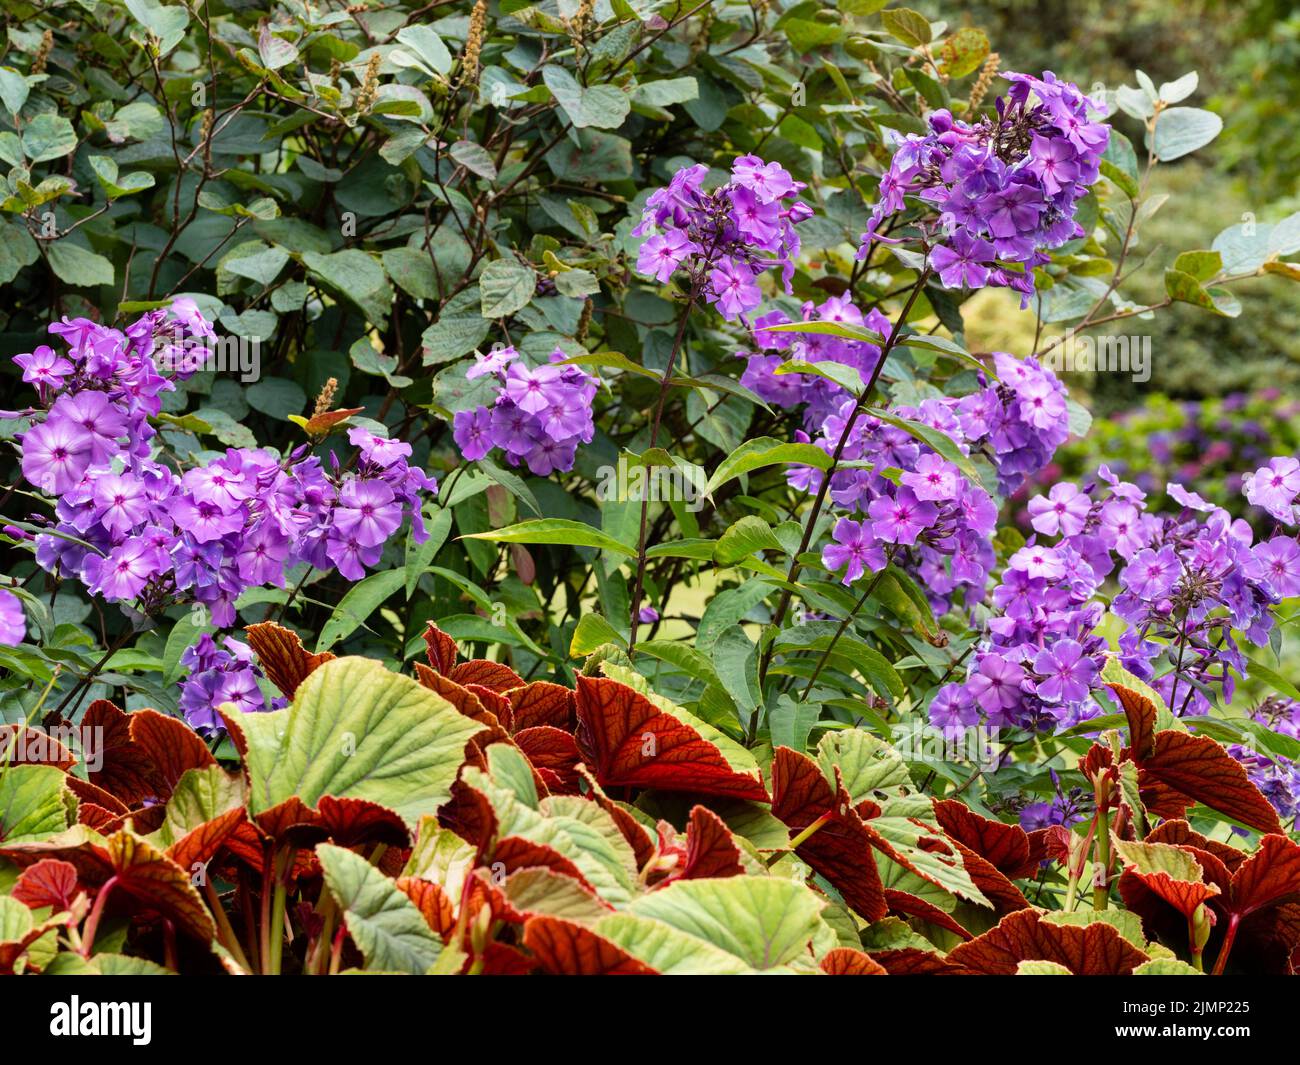 Perennial border combination of the blue flowers of Phlox paniculata 'Blue Paradise' and foliage of Begonia grandis ssp. evansiana 'Claret Jug' Stock Photo